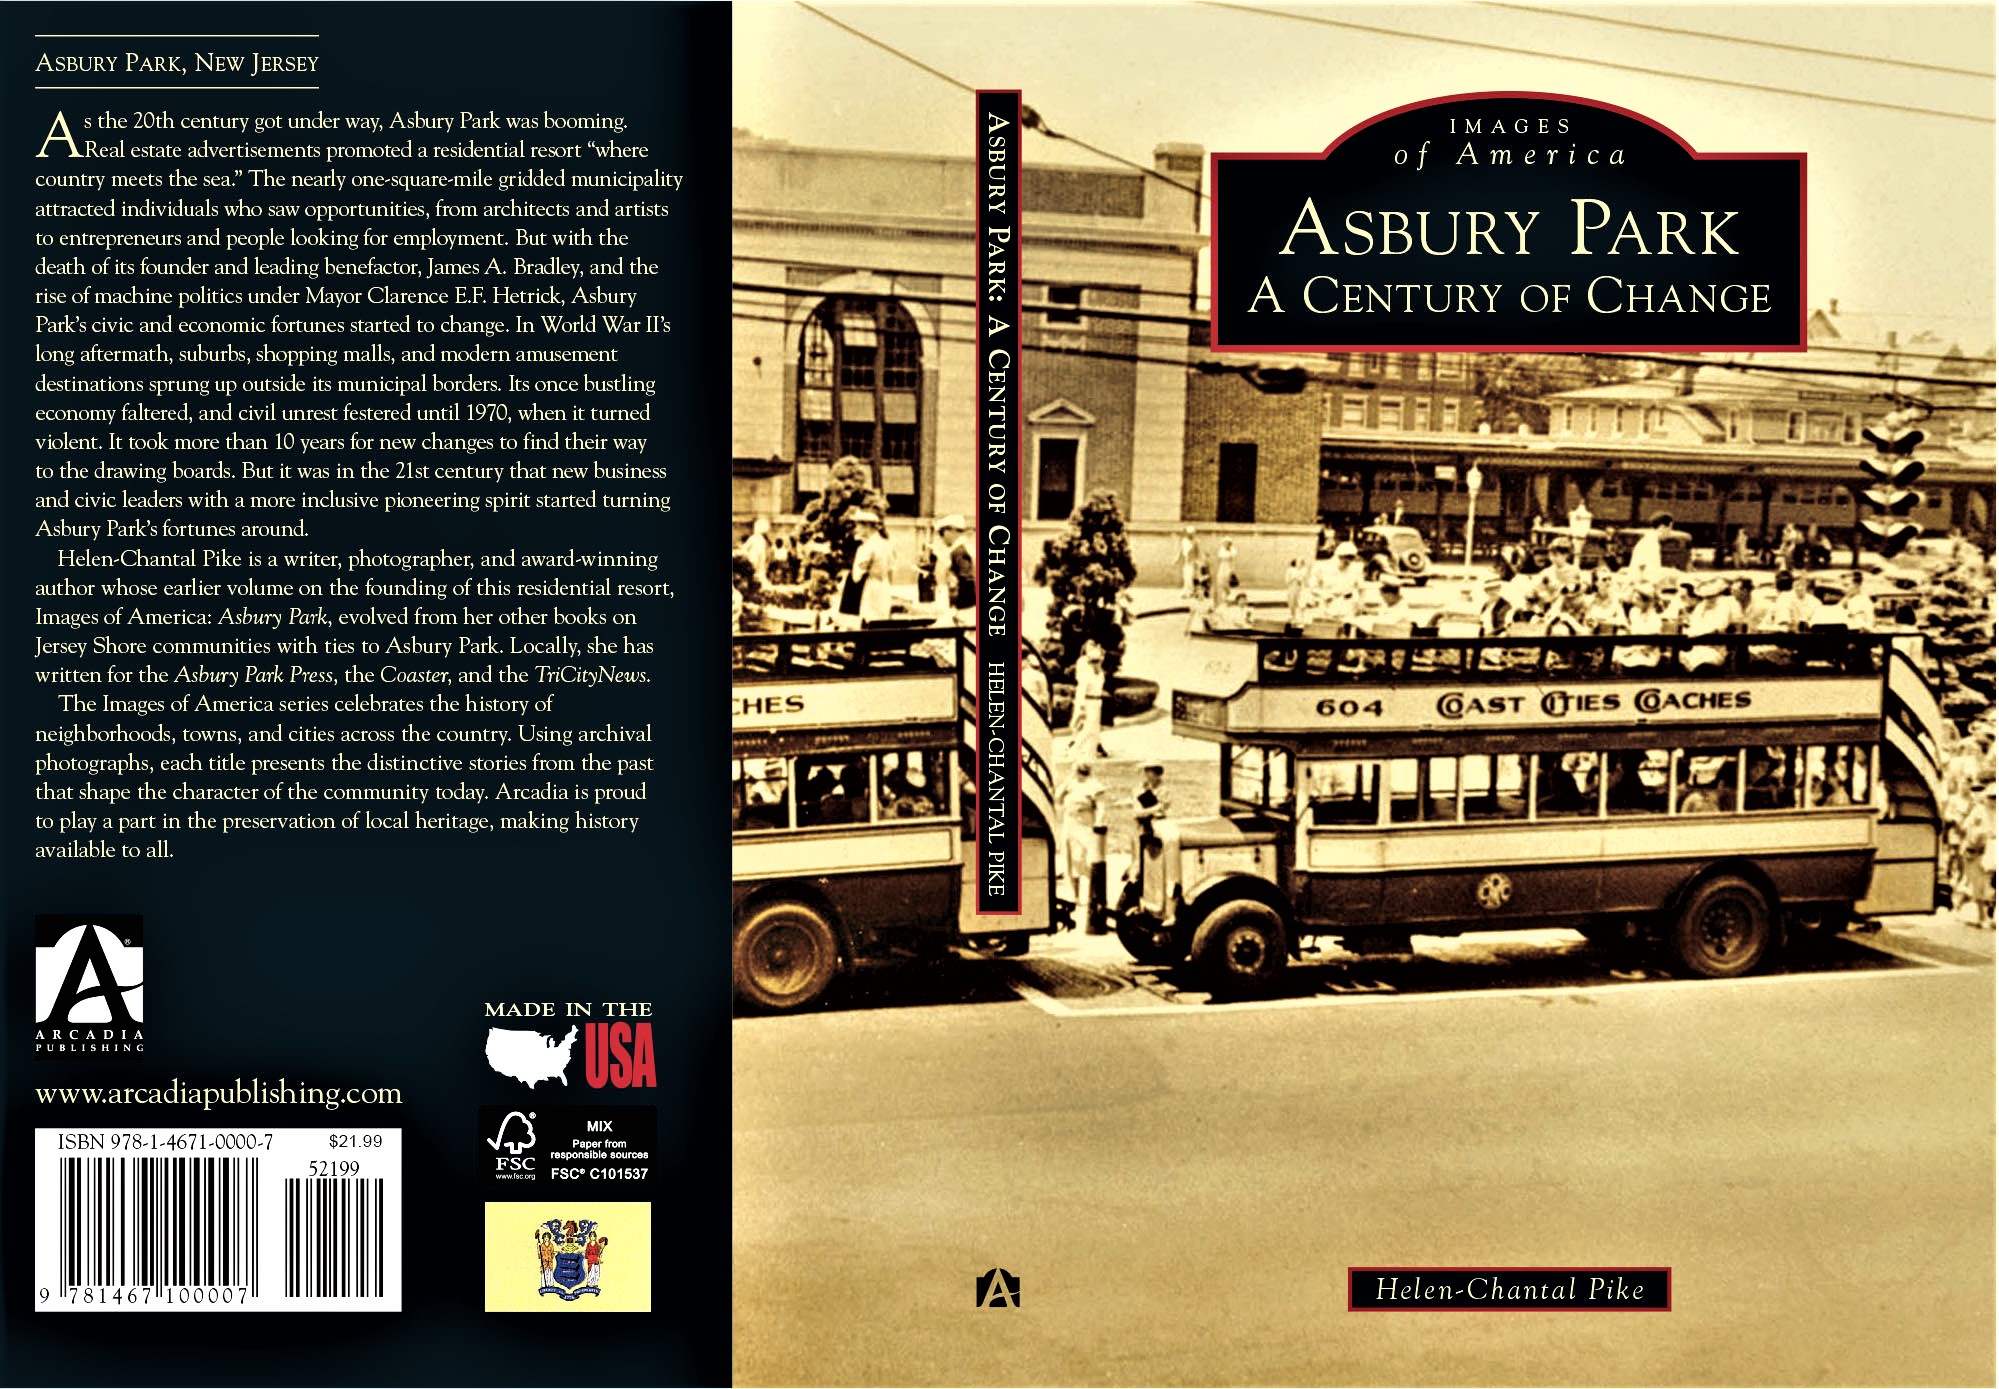 Imades of America: Asbury Park A Century of Change